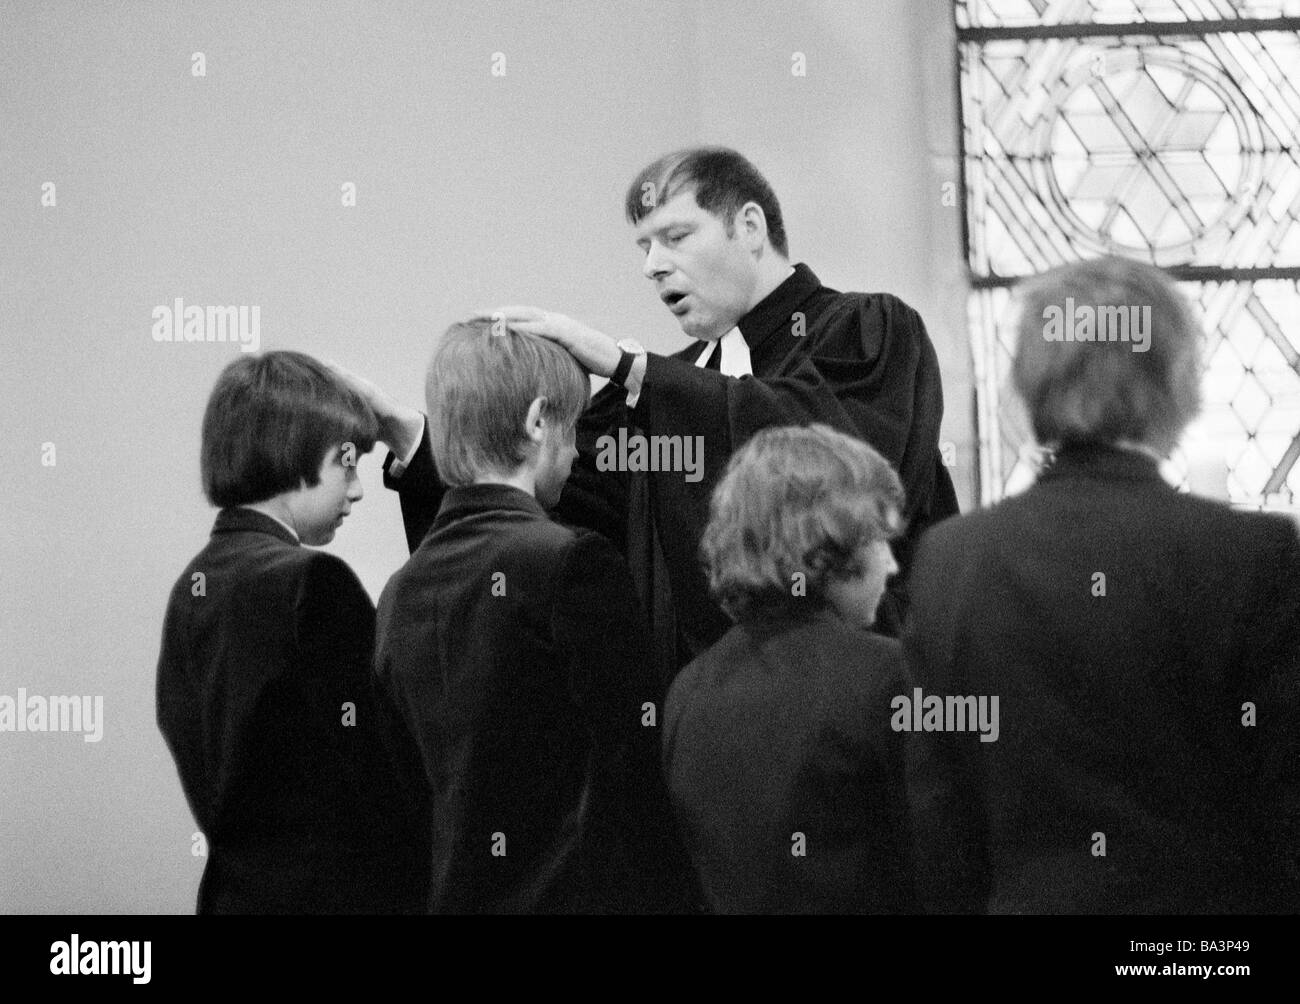 Seventies, black and white photo, religion, Christianity, confirmation, priest confirms the confirmees by laying on of hands, boys, aged 13 to 16 years, aged 35 to 40 years Stock Photo